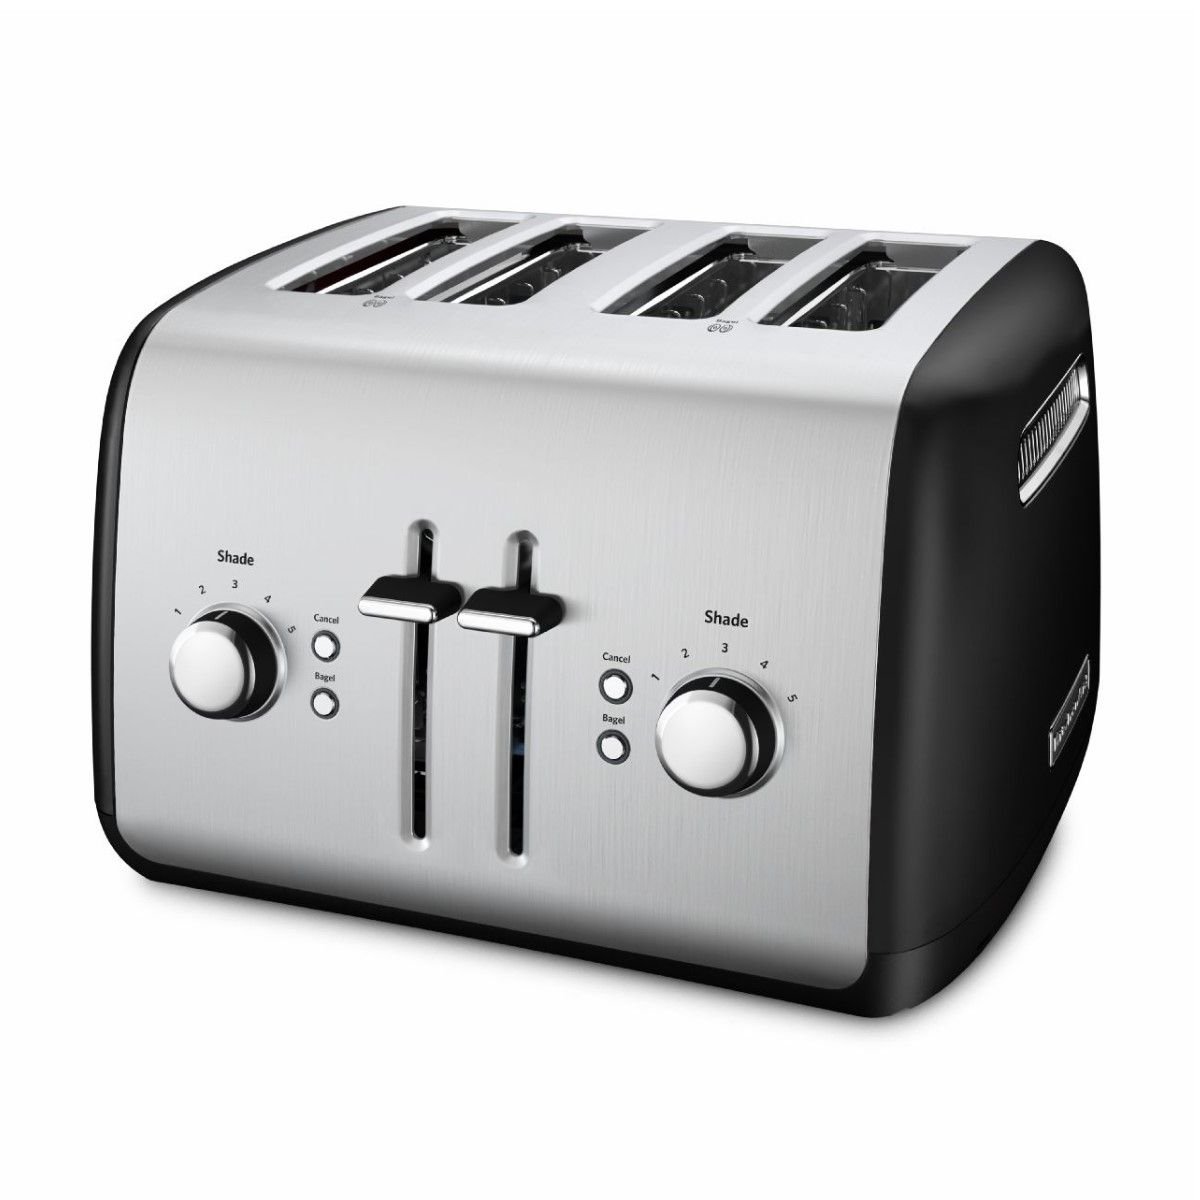 KitchenAid Pro Line 2-Slice Toaster - Frosted Pearl White